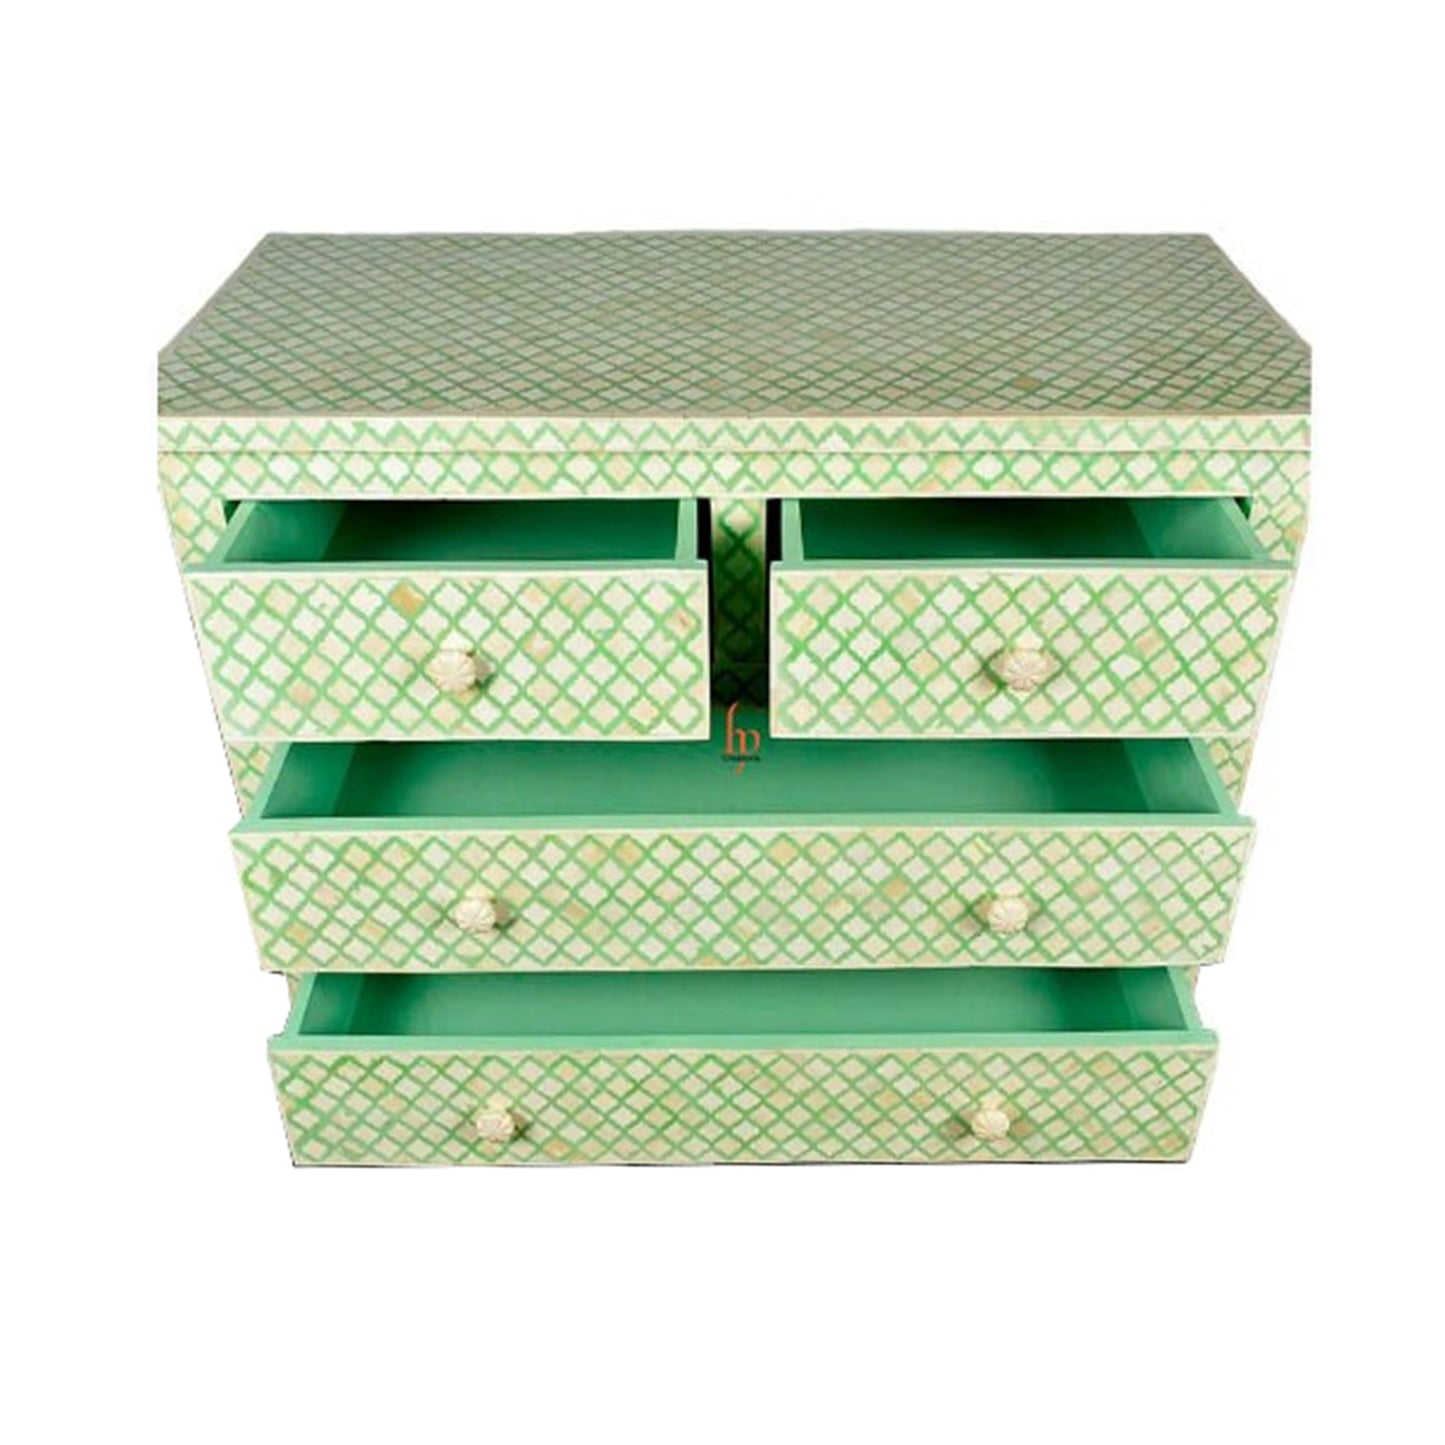 Personalized Bone Inlay Green Chest Of 4 Drawers Antique Design Modern Home Decor Inlay Furniture Perfect Storage Table